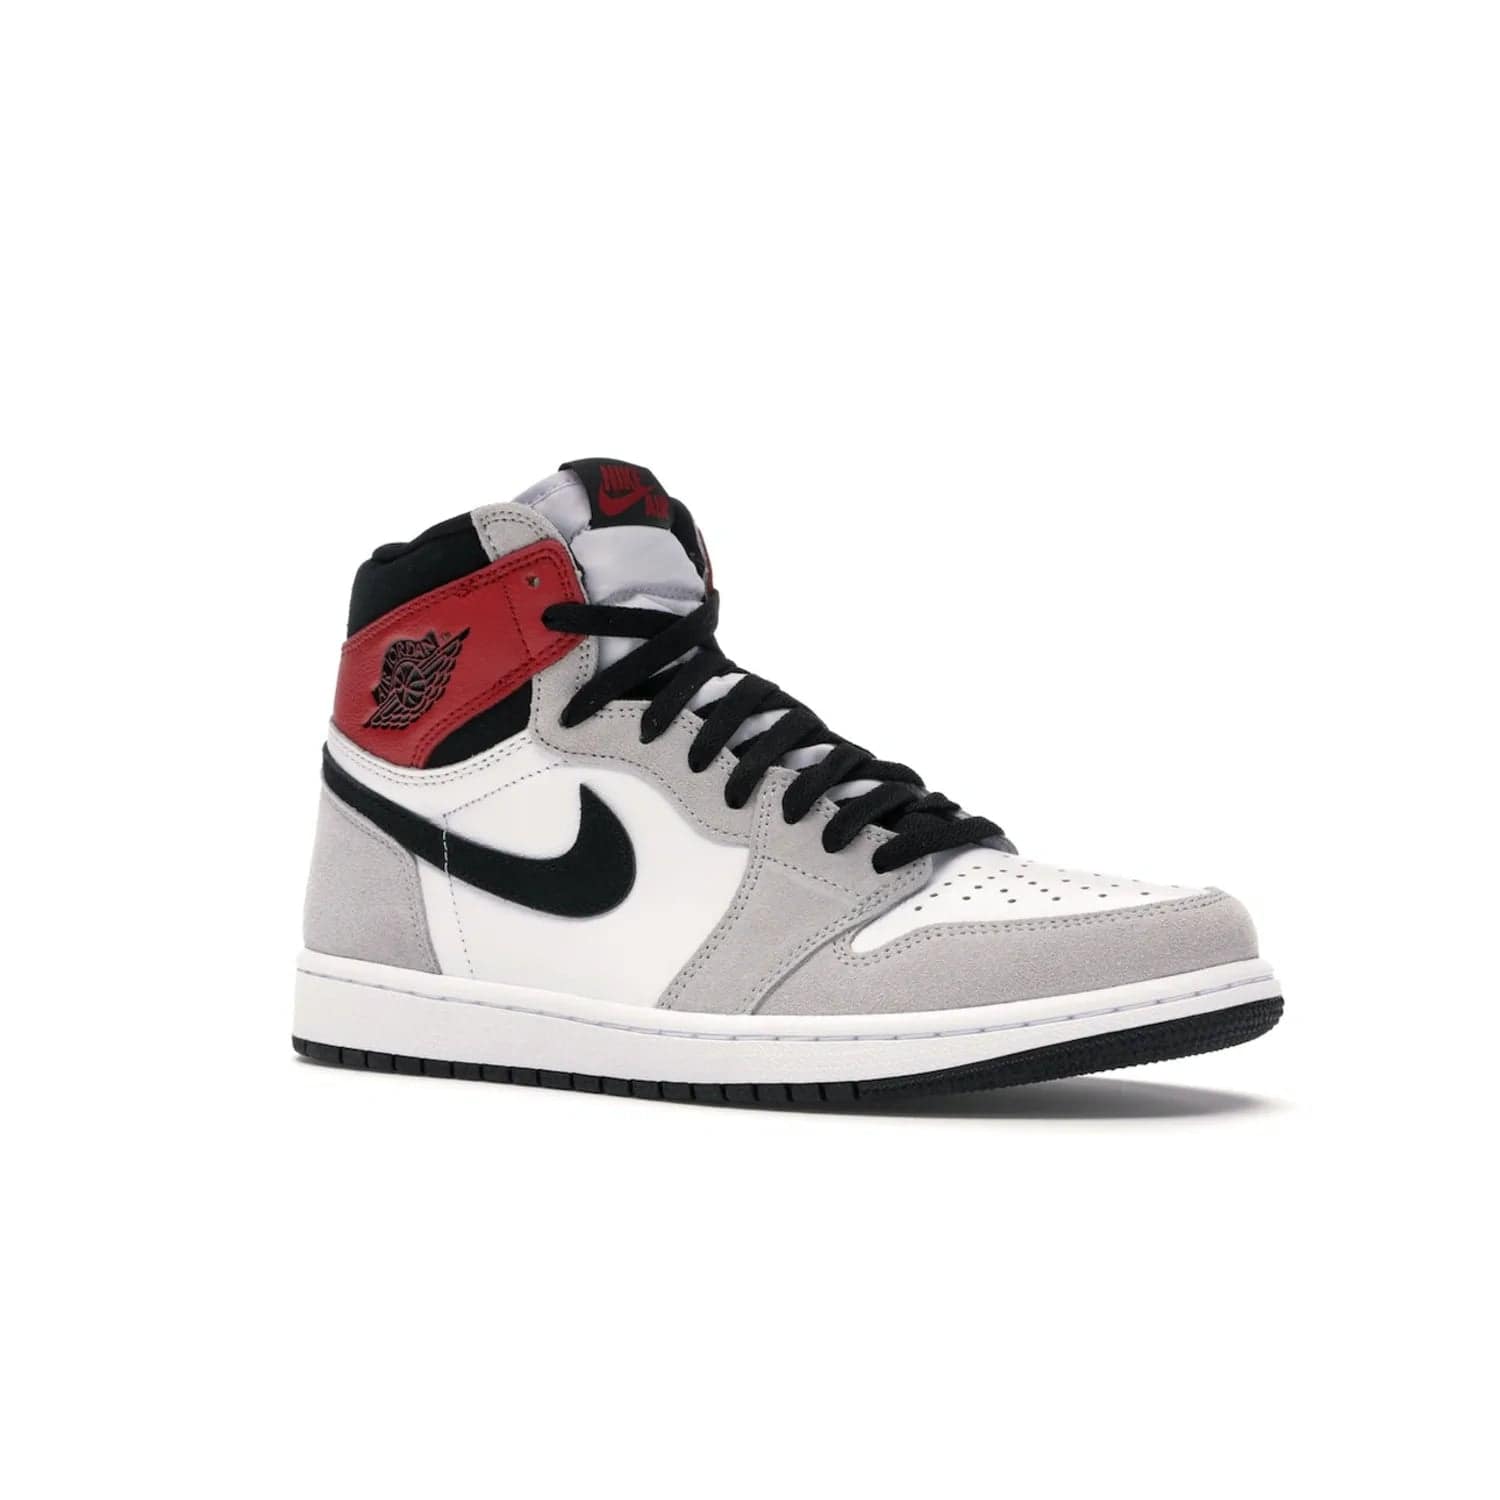 Jordan 1 Retro High Light Smoke Grey - Image 4 - Only at www.BallersClubKickz.com - Comfortable and stylish, Jordan 1 Retro High Light Smoke Grey offers a unique spin on a classic design. White leather, grey suede, red leather and black details are set on a white midsole and black outsole. Get the sneaker released in July 2020 and add a twist to your wardrobe.